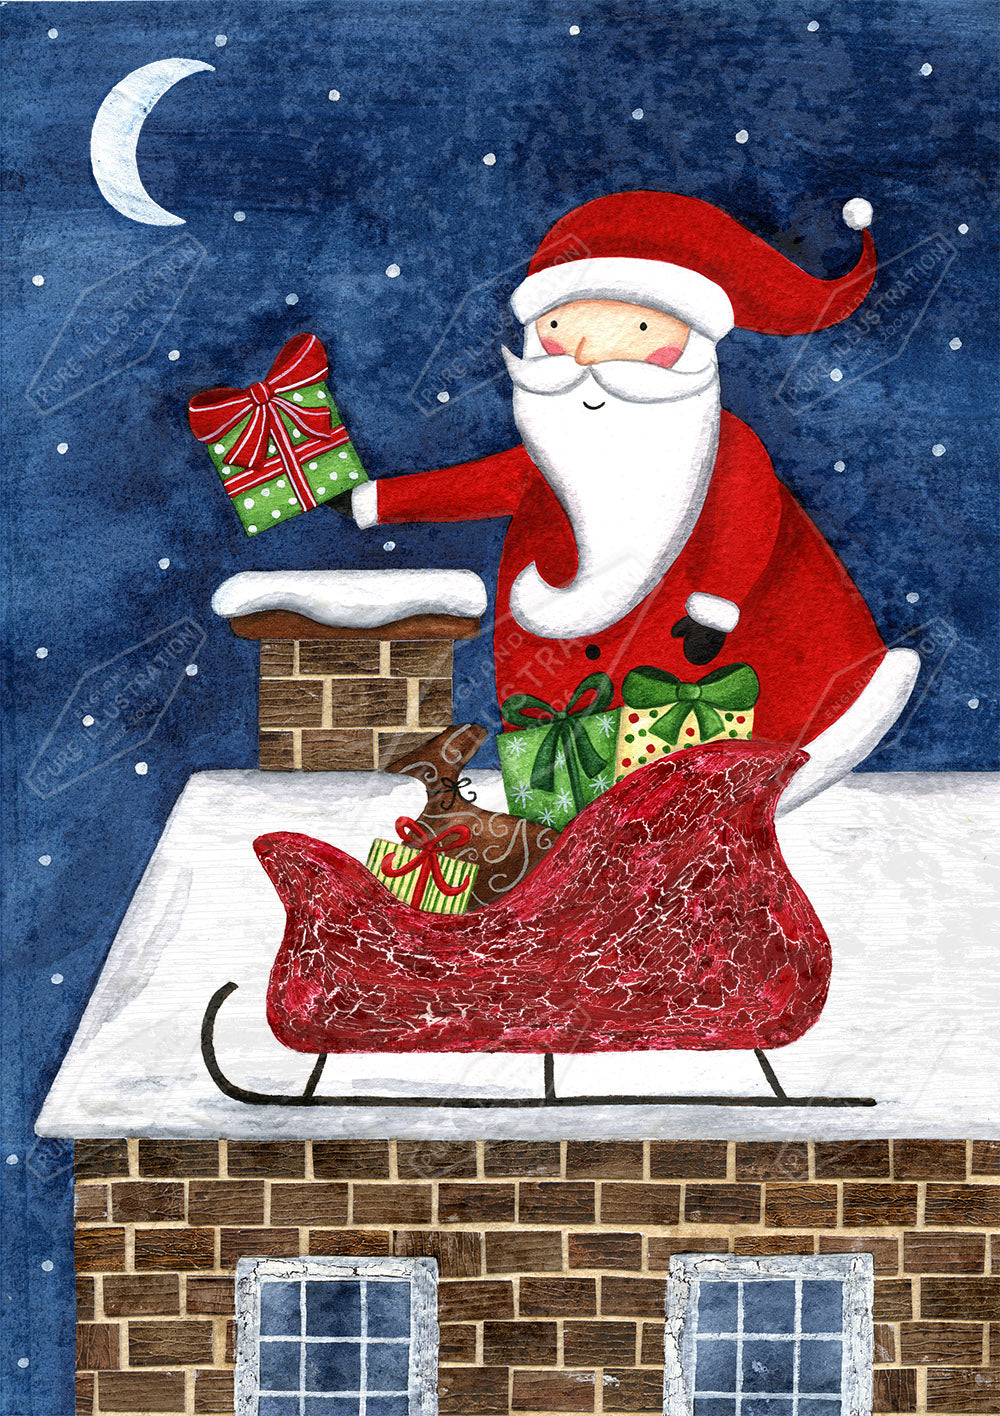 00025802AAI - Santa delivering Gifts by Anna Aitken - Pure Art Licensing & Surface Design Agency